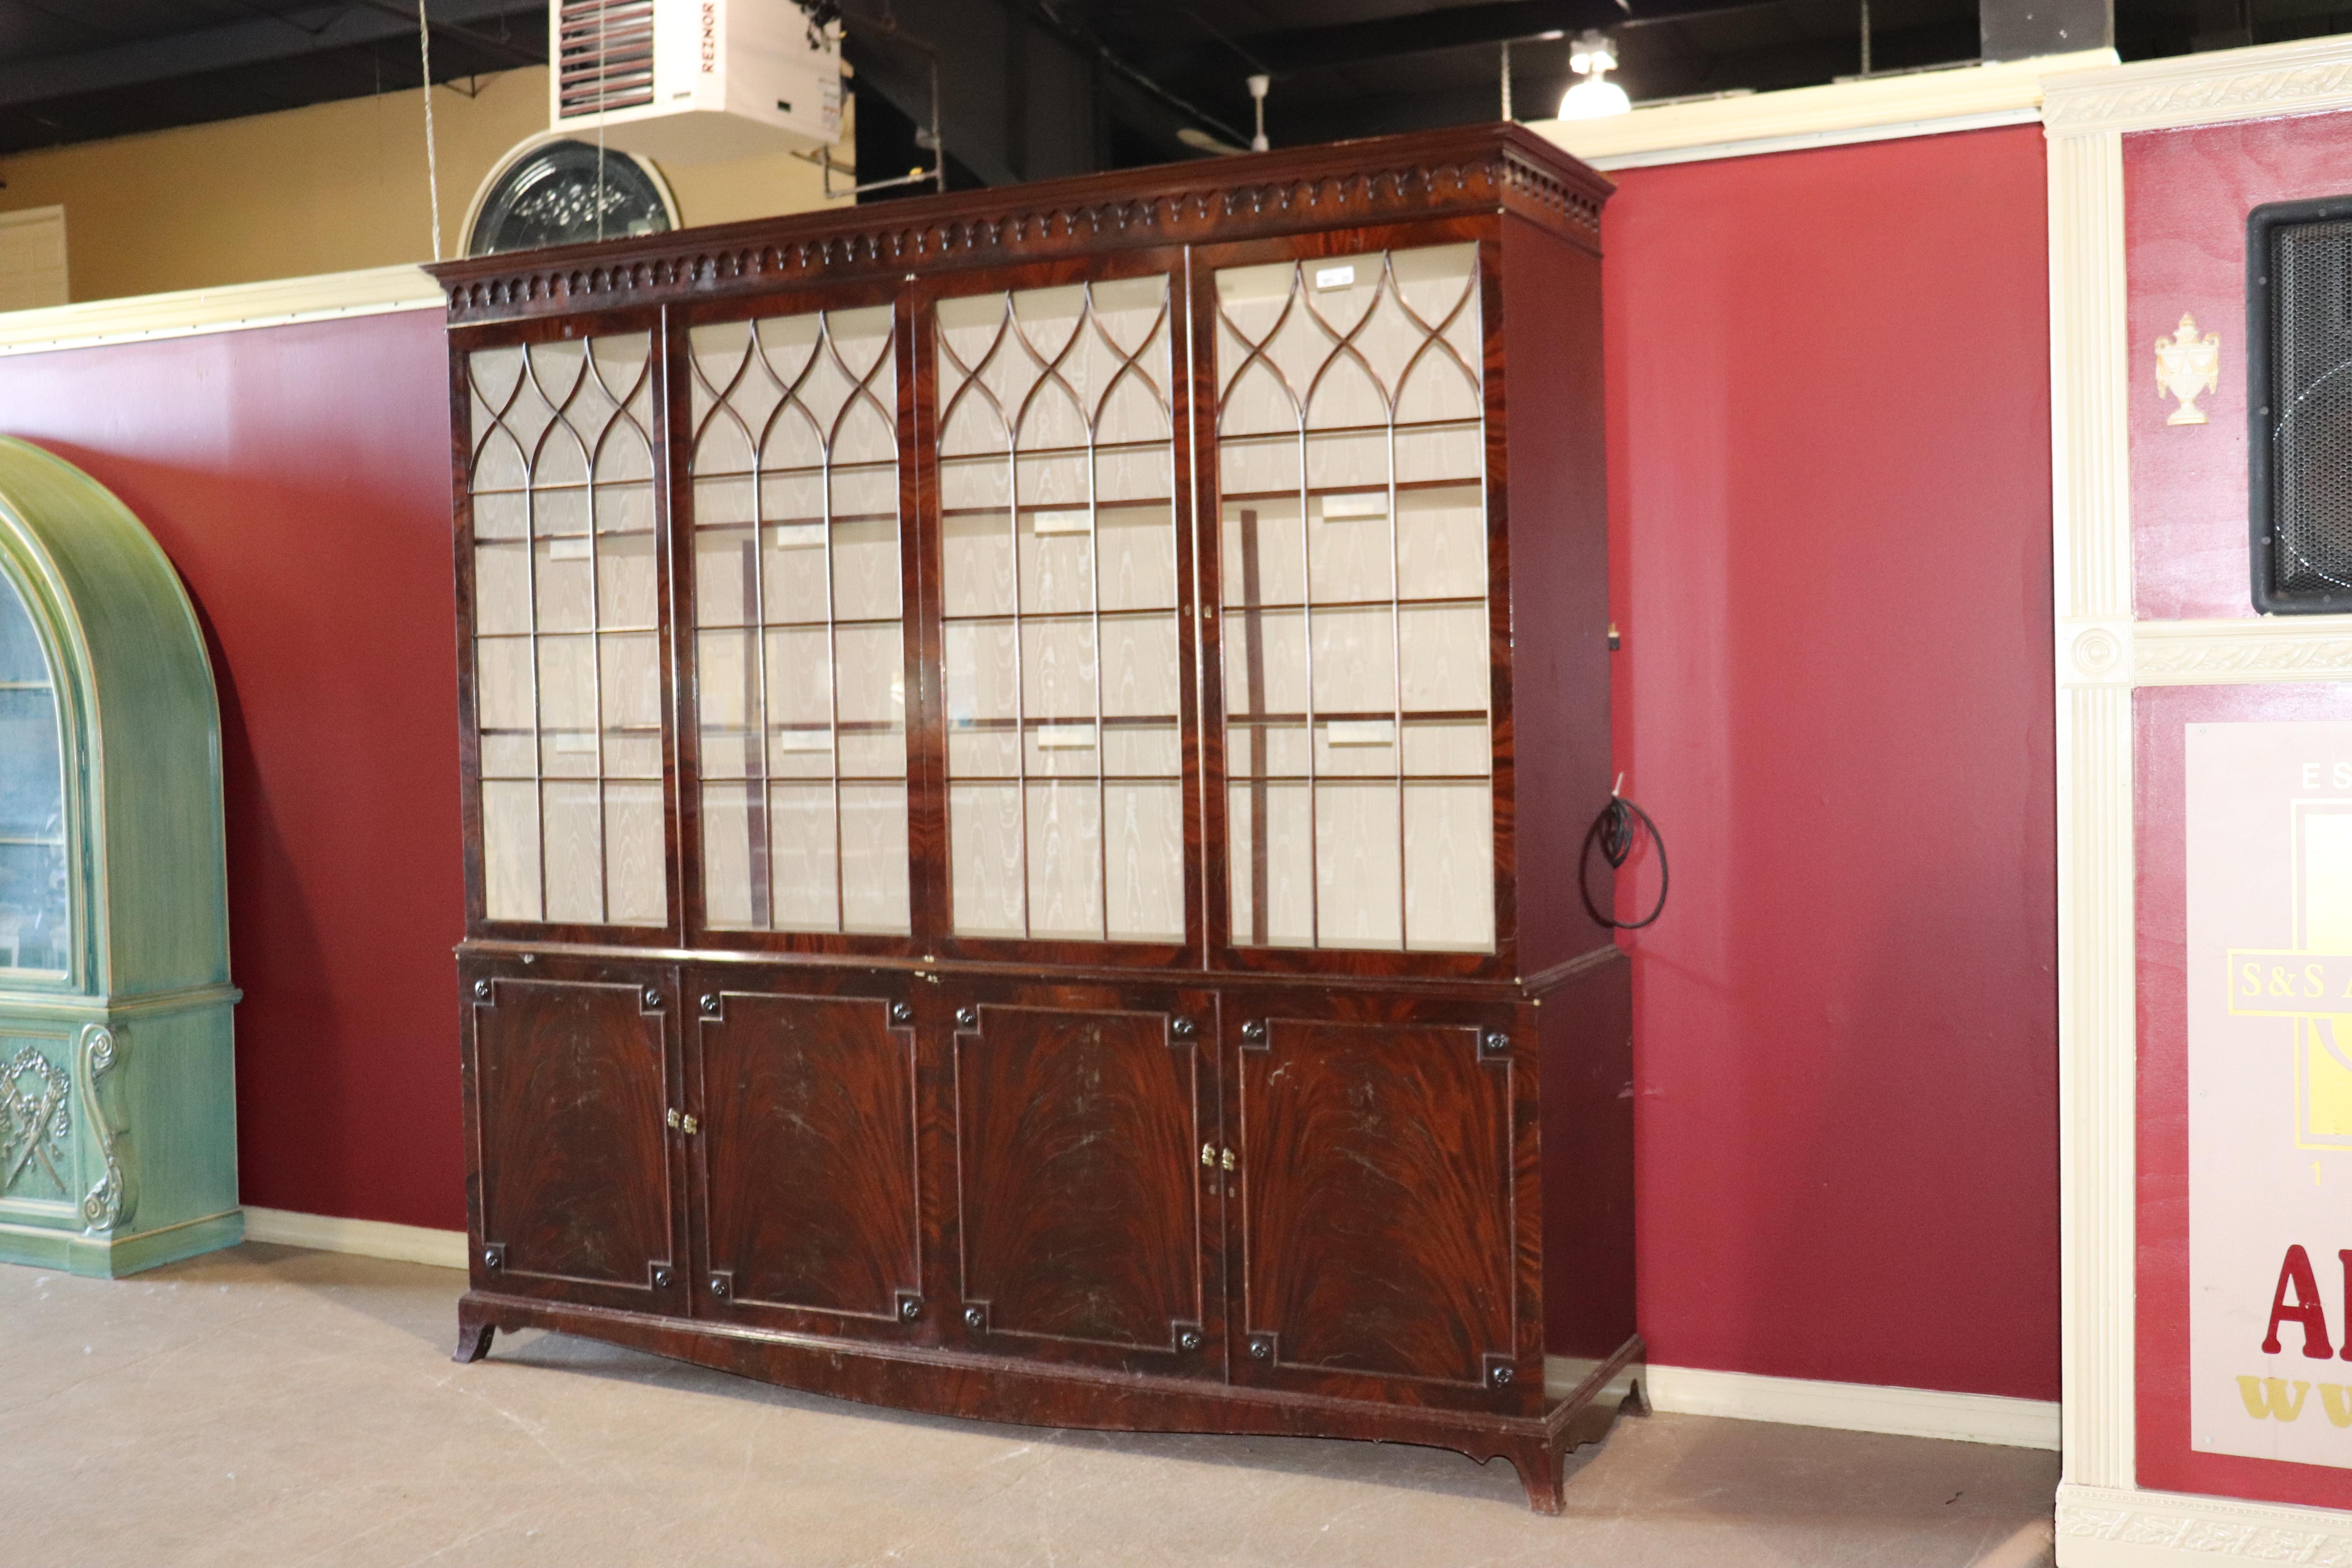 This is an enormous custom made breakfront that will need some finishing and work, but may just be perfect for a person that is considering making a custom made wall bookcase, circa 1930. For a relatively small sum of money, this can be